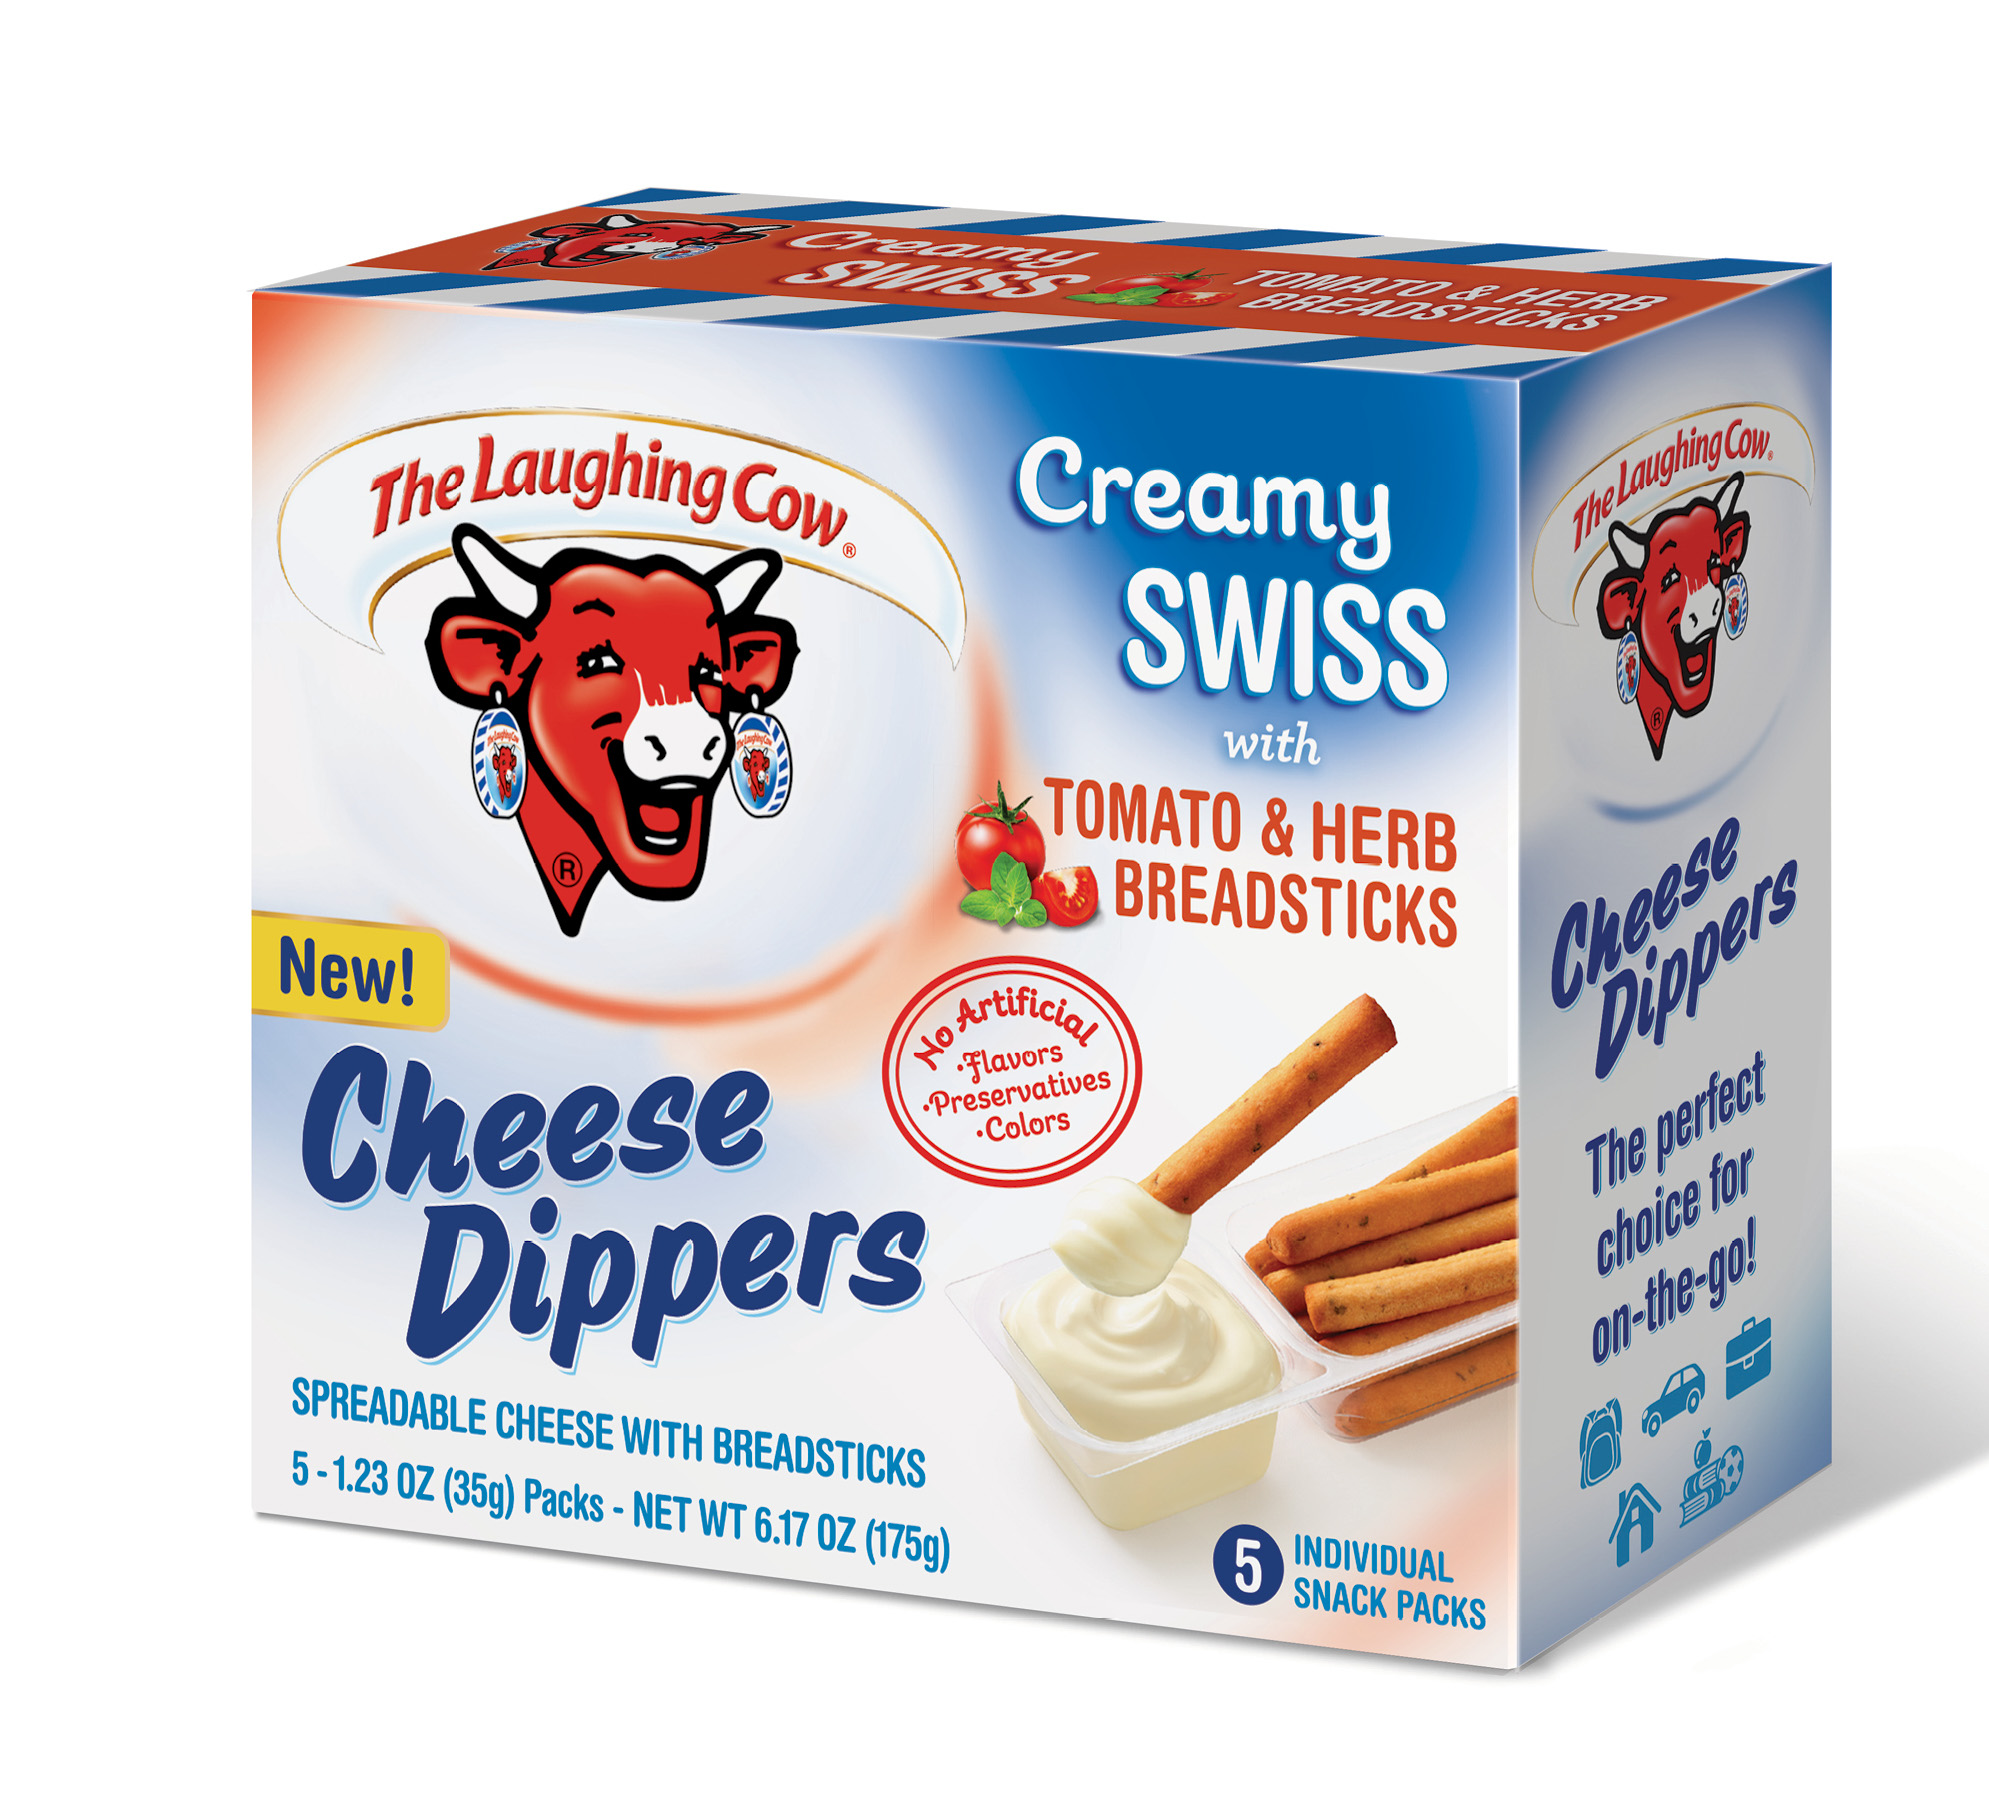 The Laughing Cow Cheese Dippers â Food and Product Reviews â Food Blog | Bite of the Best